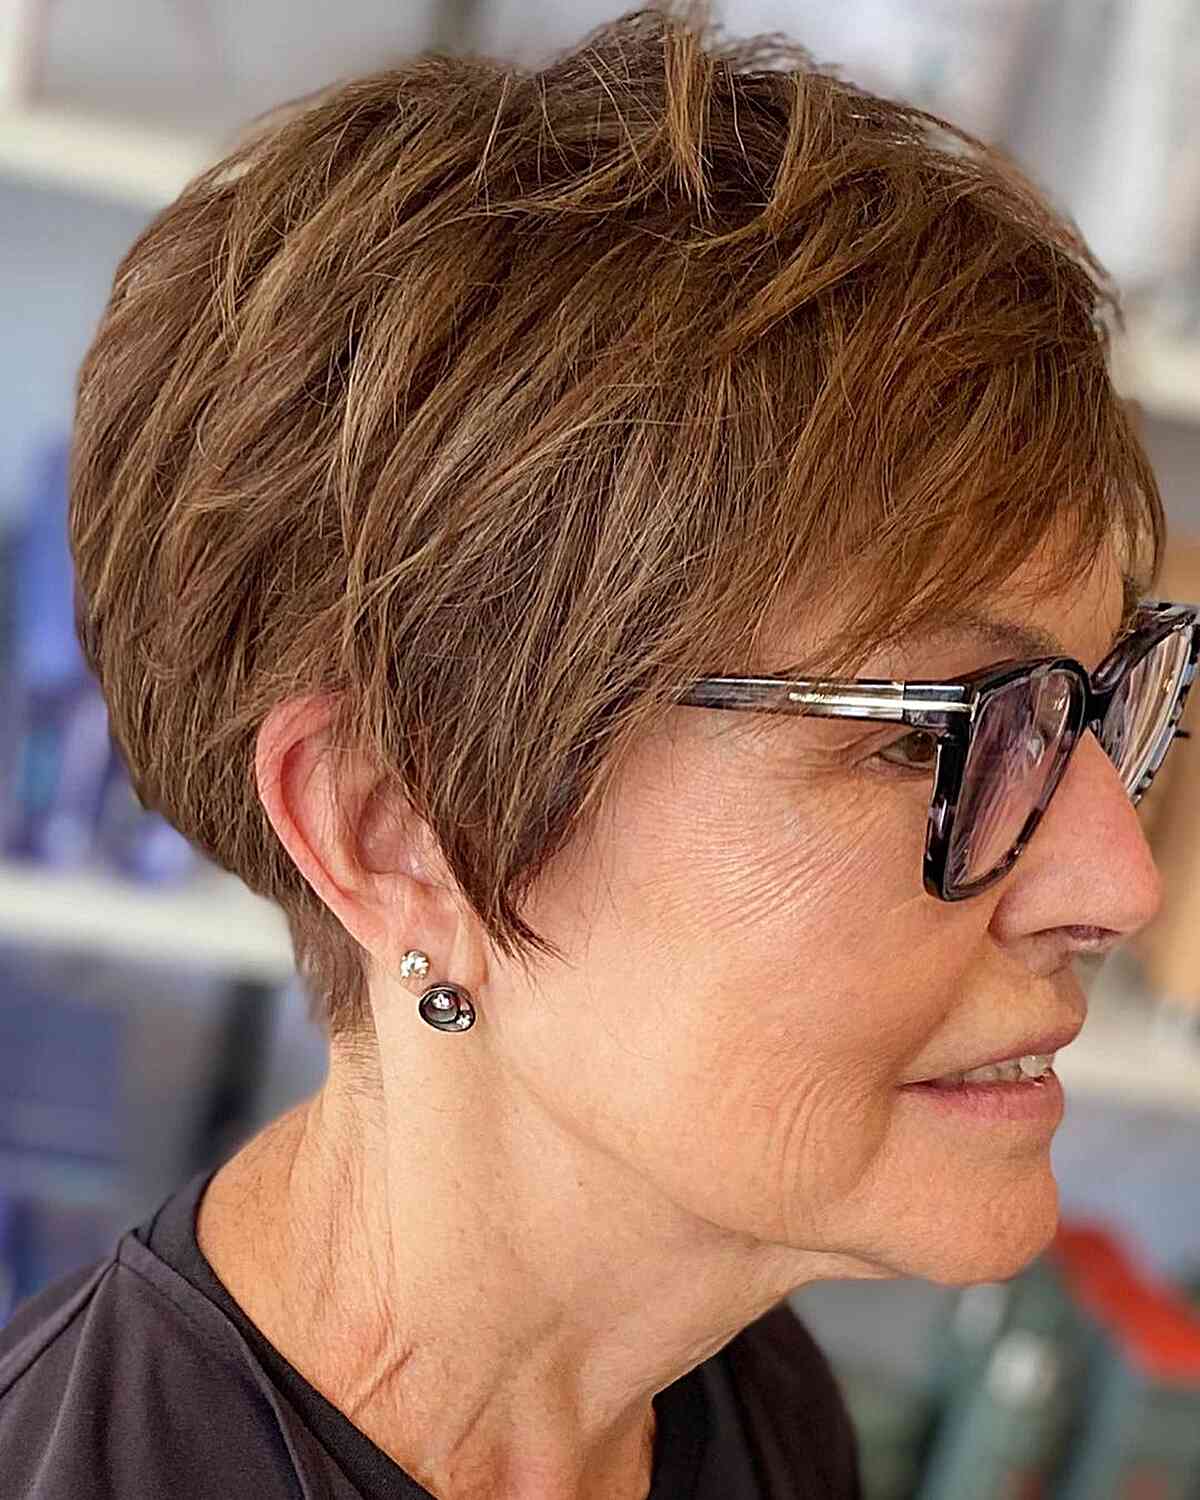 candace fontanez share hairstyles for over 50 with glasses photos